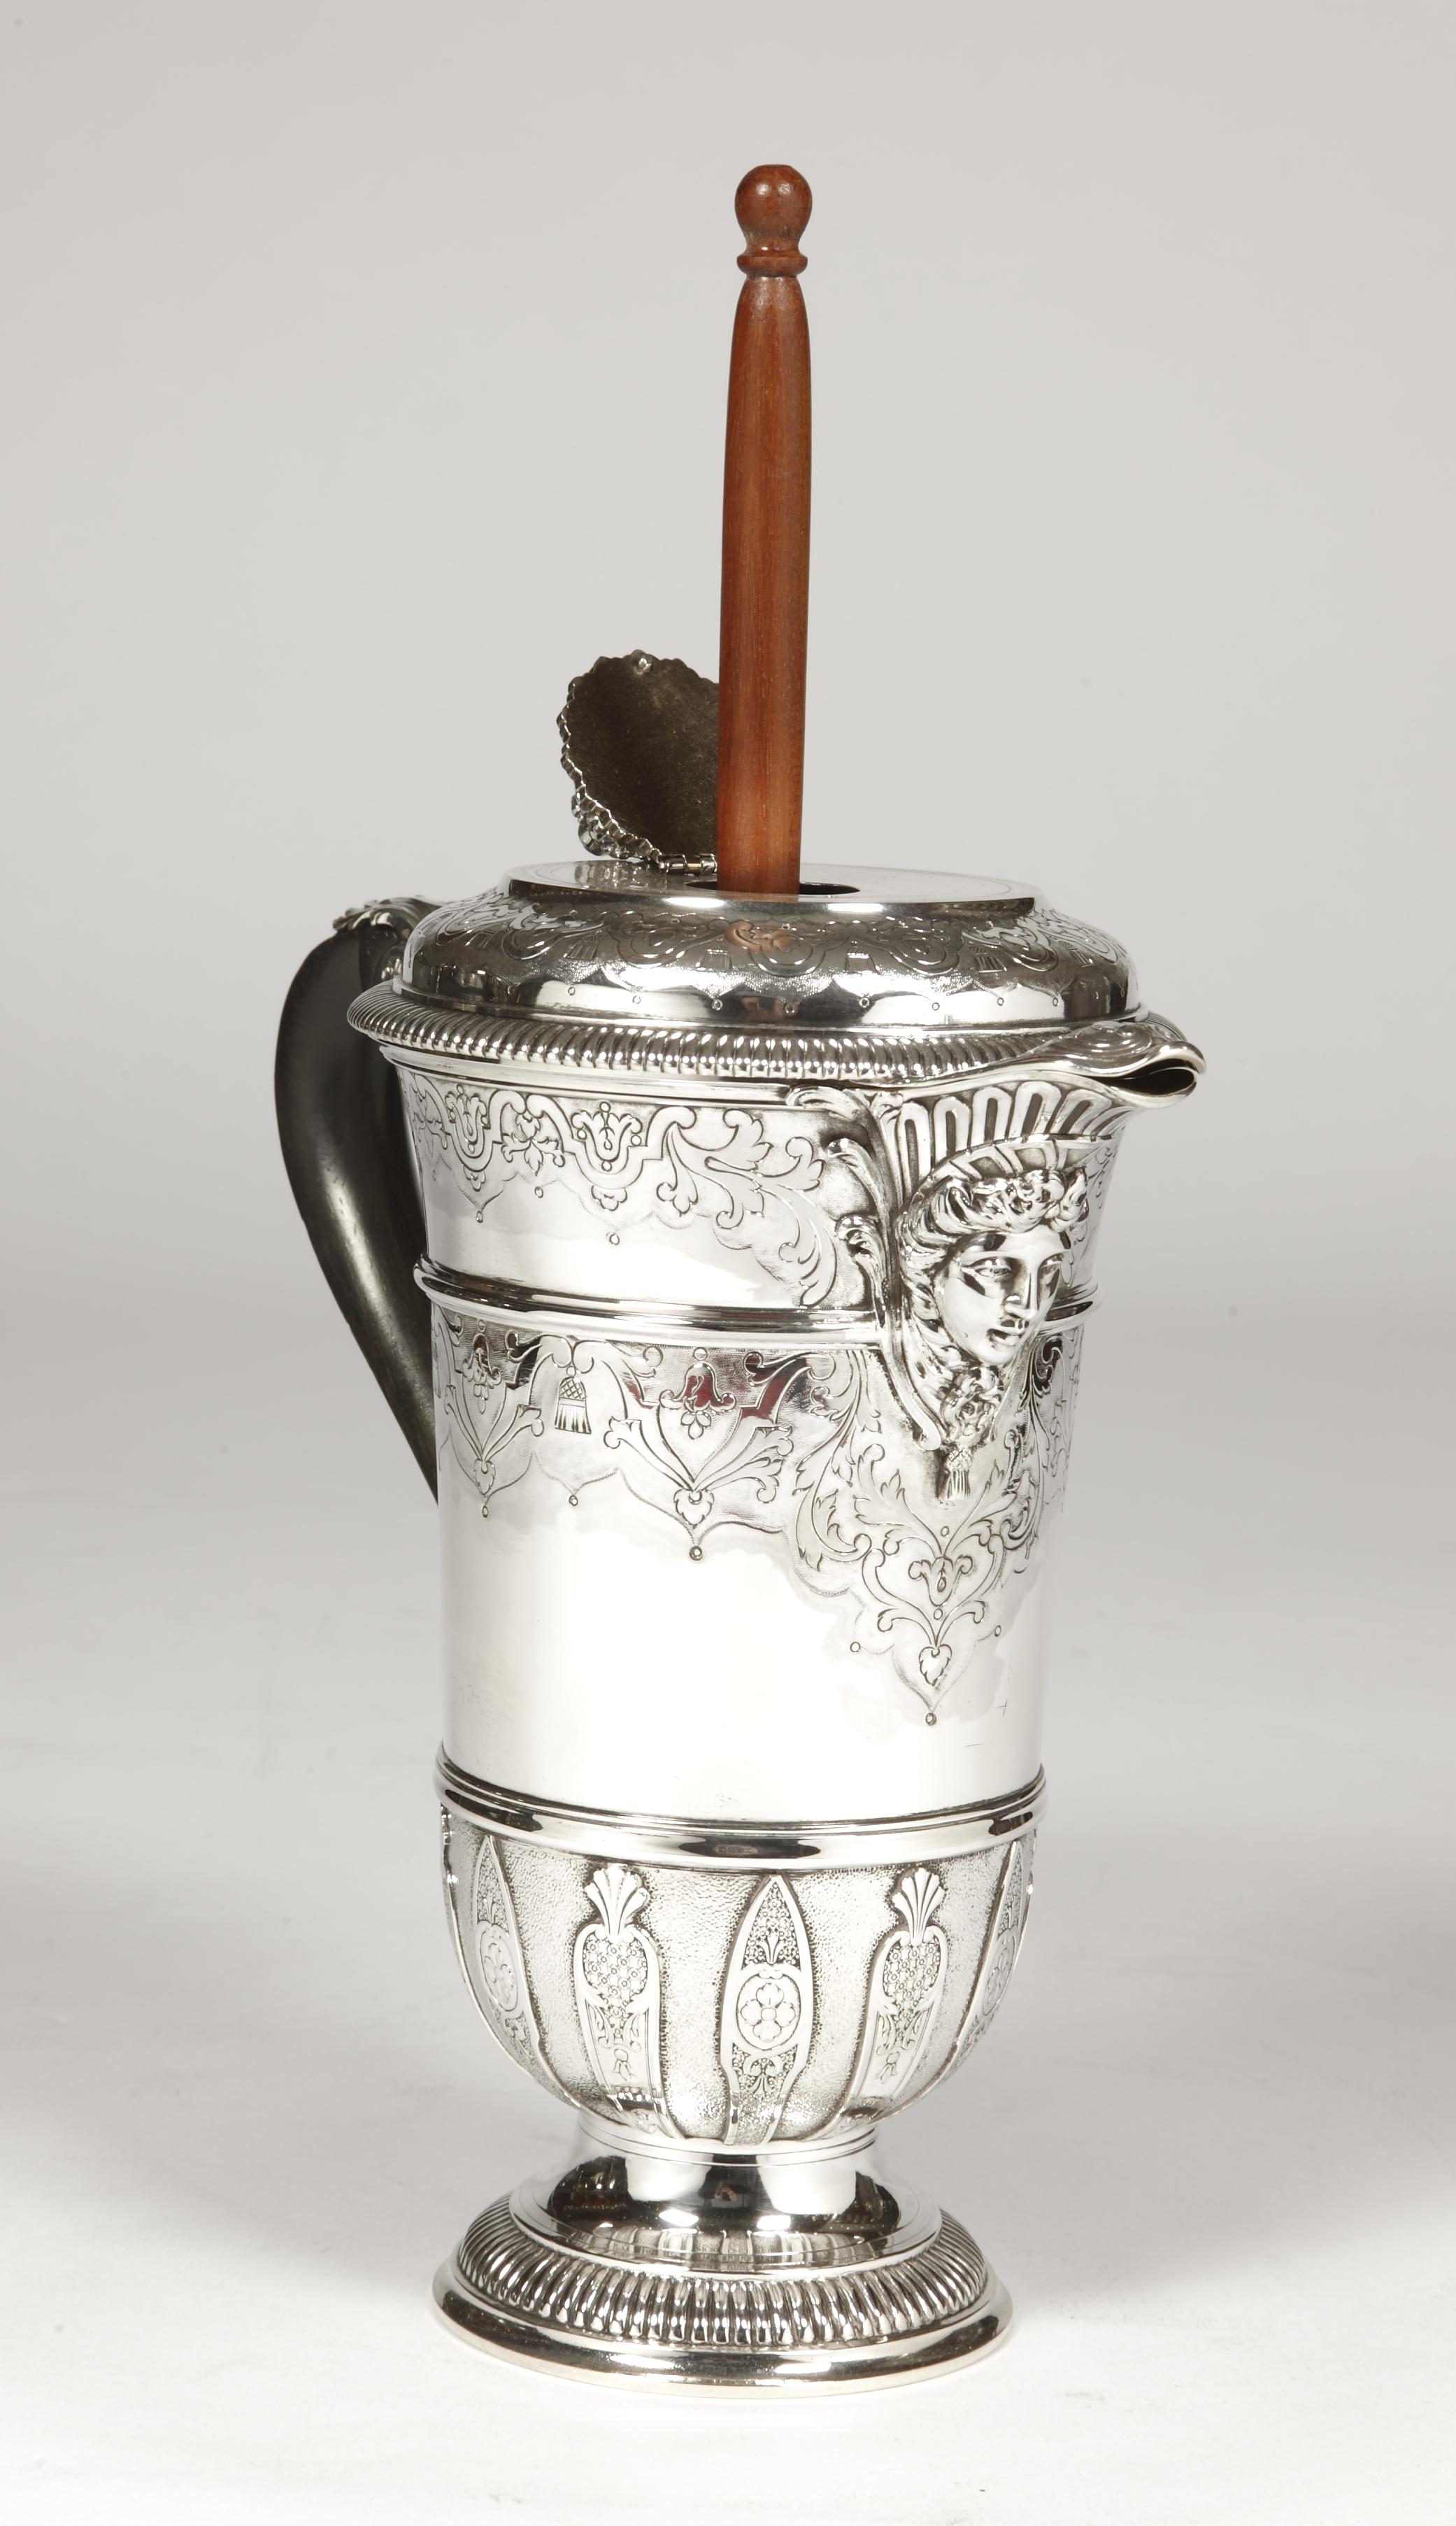 CARDEILHAC ORFEVRE - CHOCOLATE SILVERSTERLING XIXè
Chocolatier in solid silver and chocolate stick, model pieddouche decor gadroons and appliques on amati background. The body is chiselled with lambrequins and arabesques. The pouring spout is